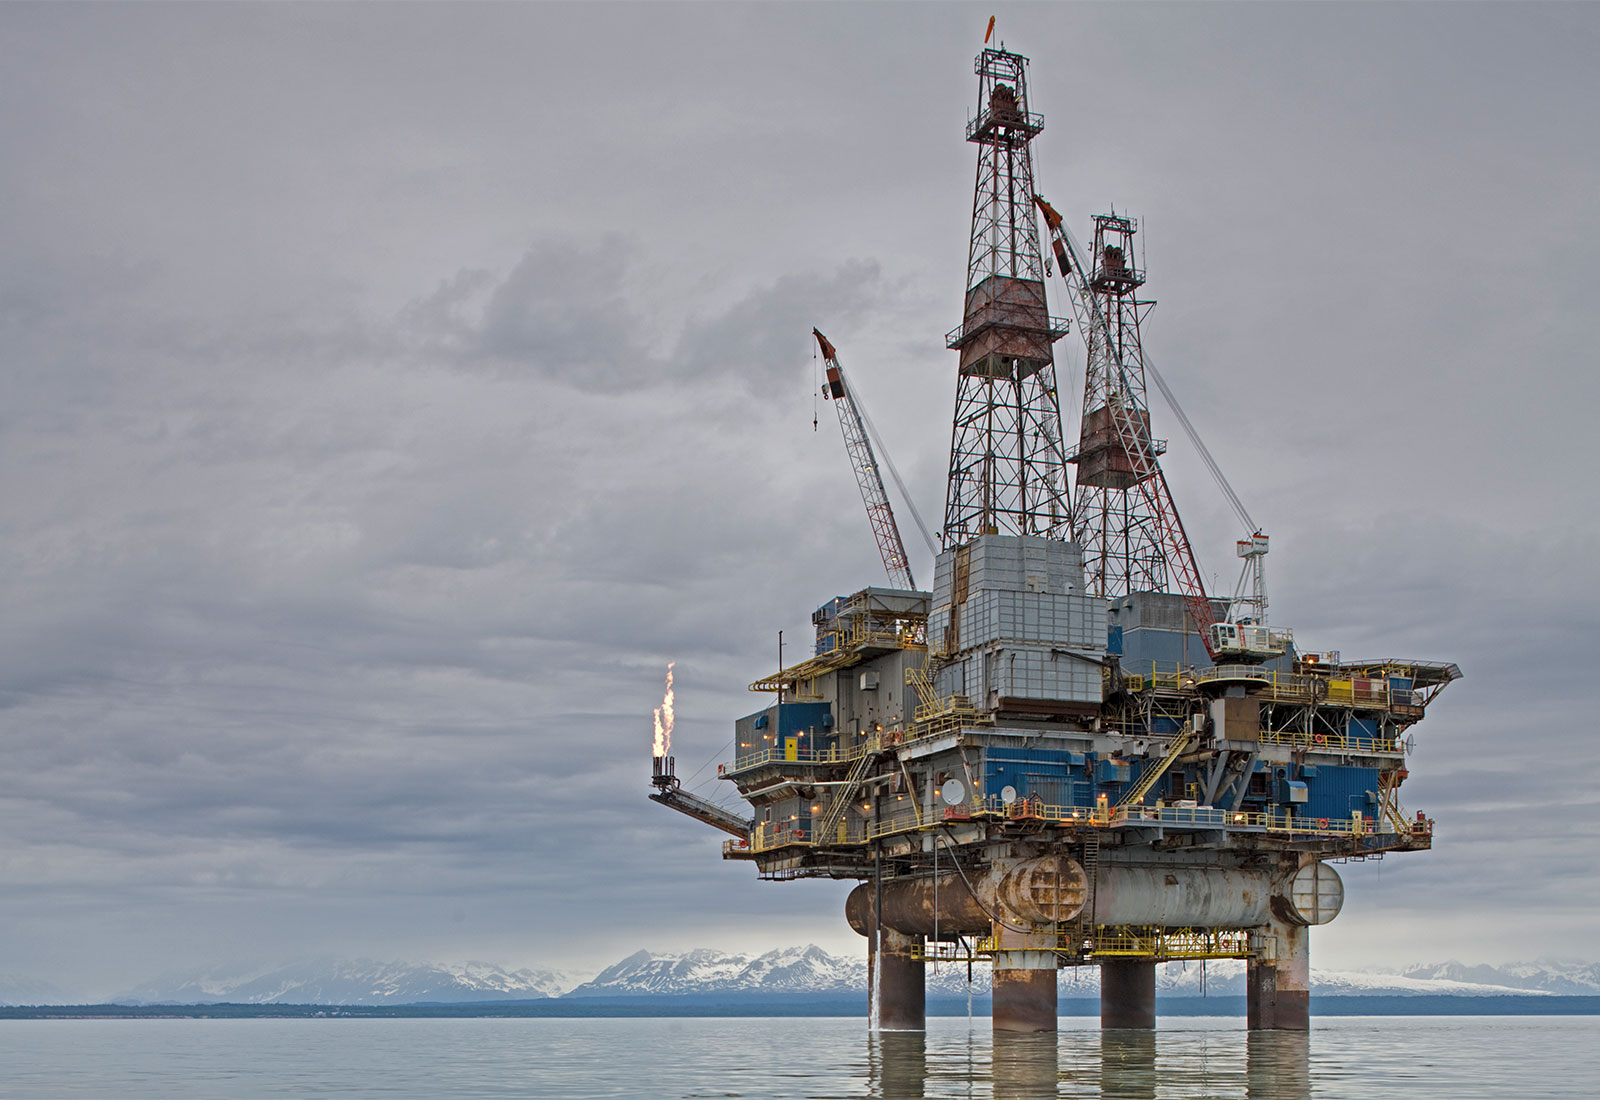 Offshore oil rig in water with Alaskan mountains in the distance